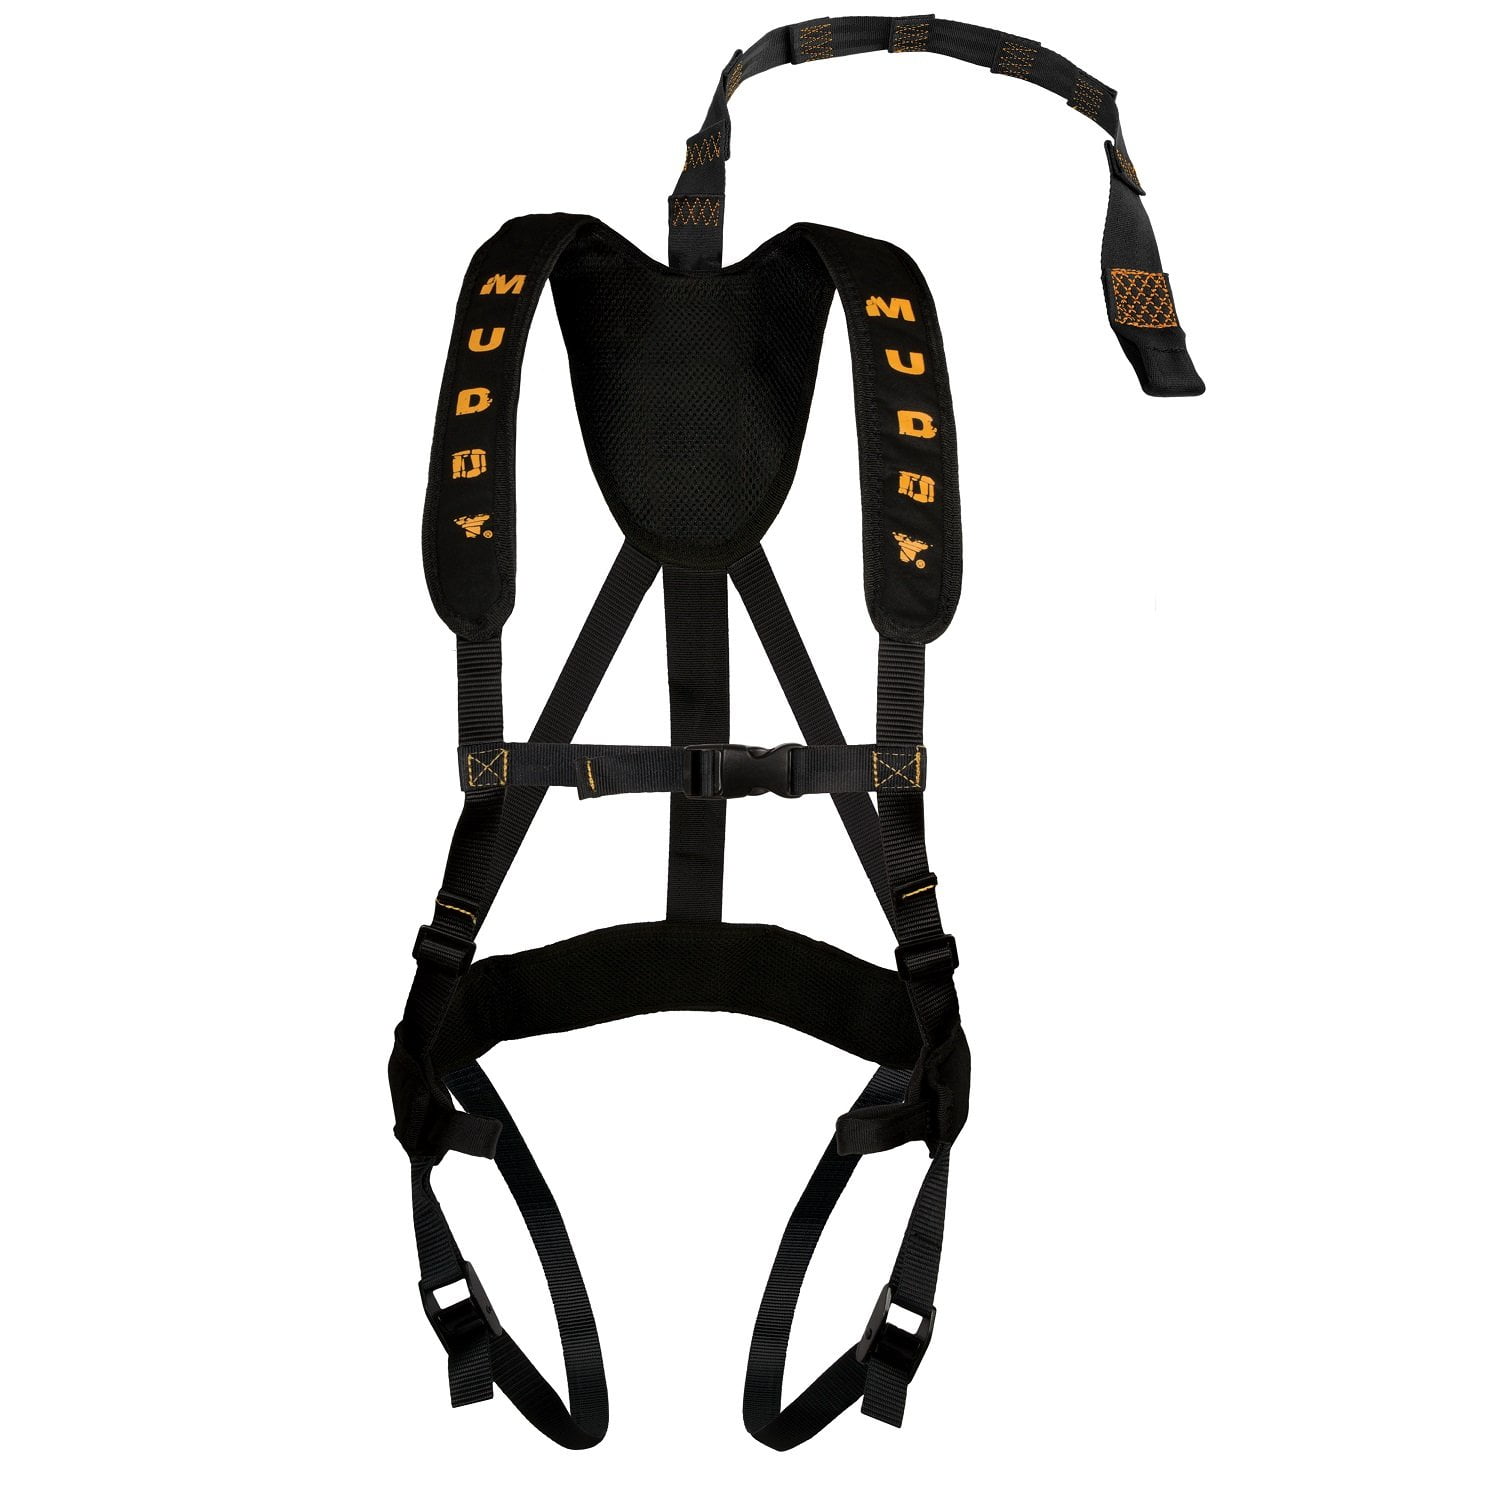 Safety Harness Tree Strap Lineman Climbing Belt Hunting High Quality Outdoor New 